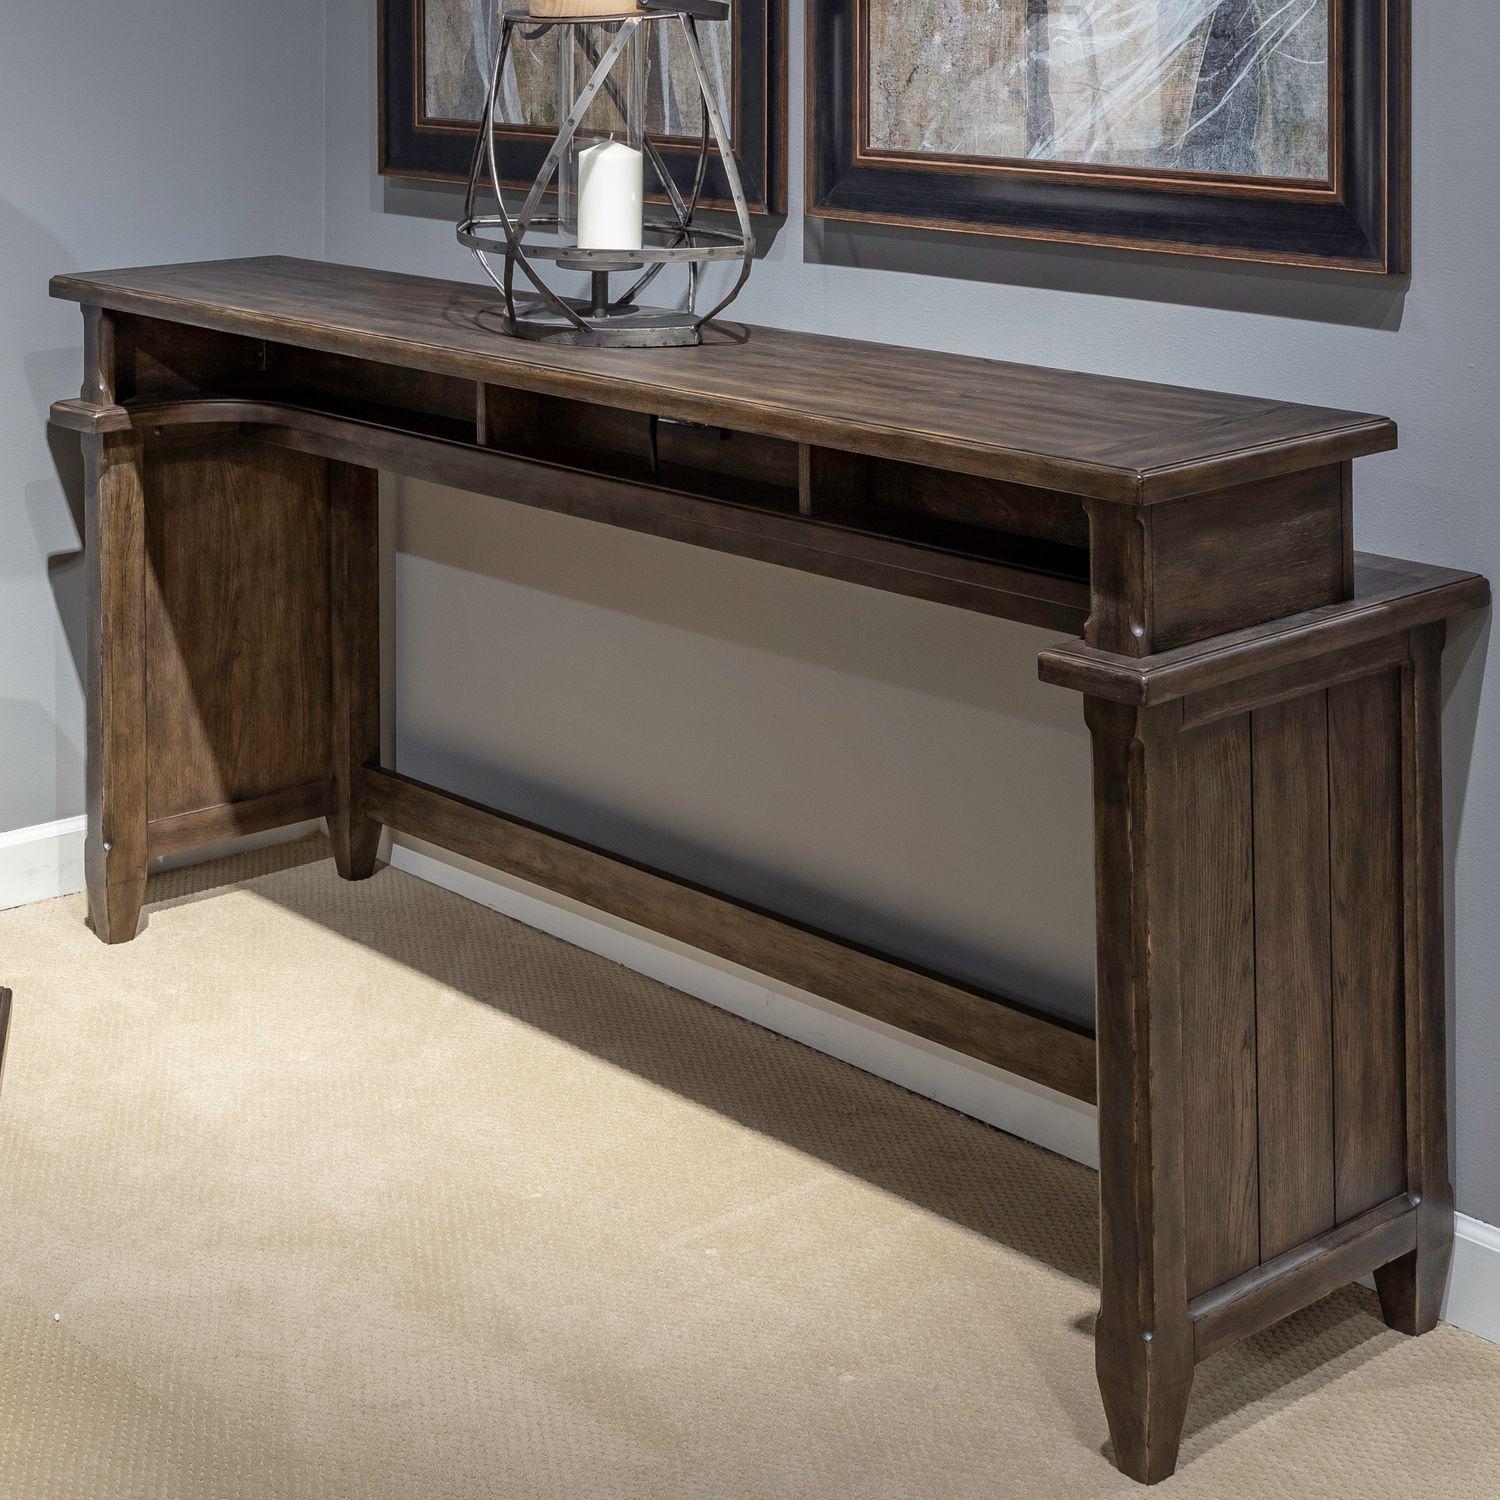 Transitional Console Table Paradise Valley (297-OT) 297-OT7837 in Brown 